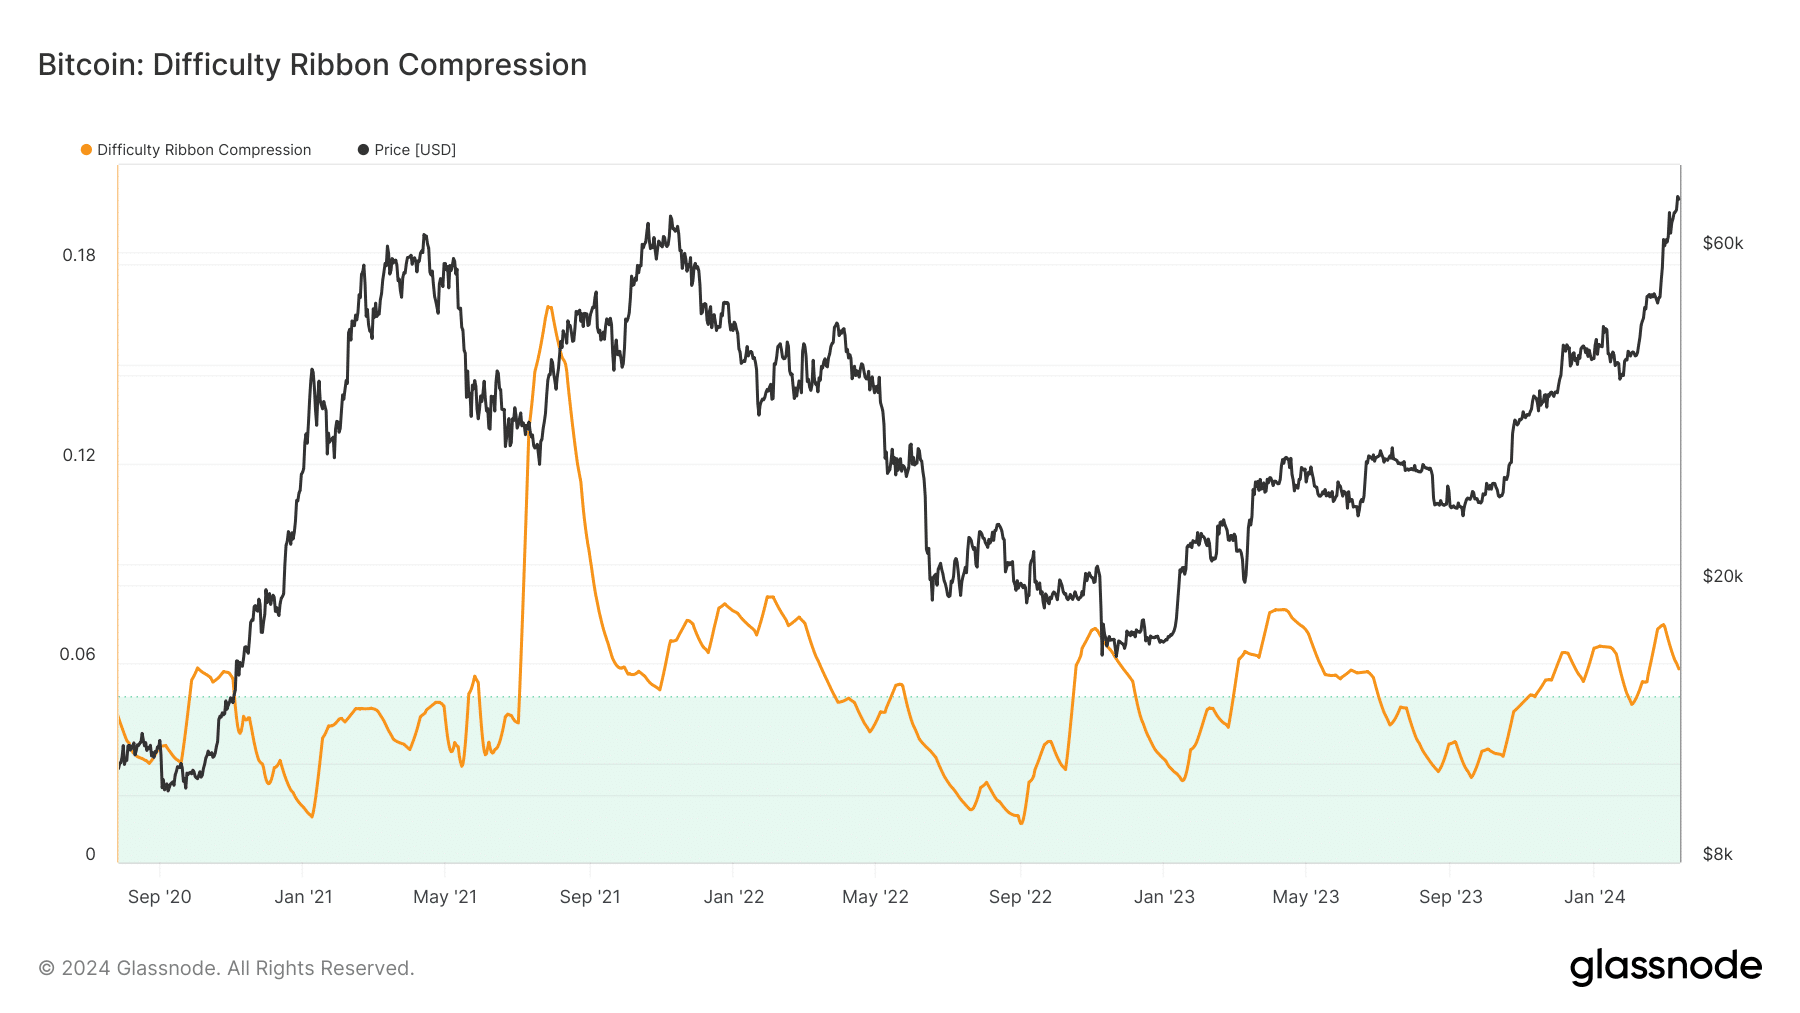 Bitcoin difficulty compression shows a bullish price forecast